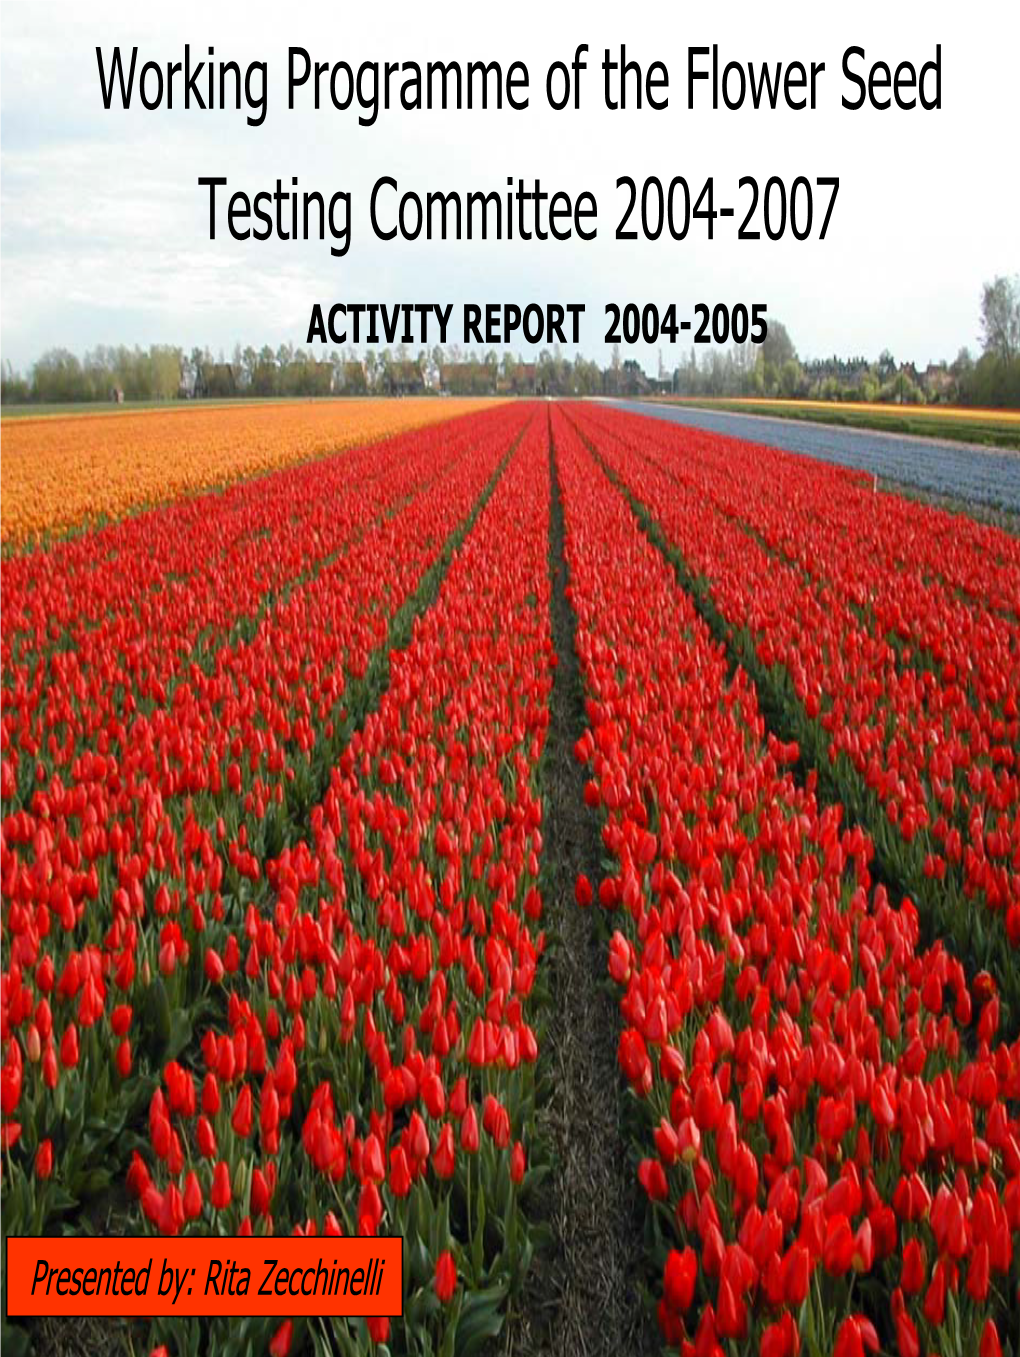 Working Programme of the Flower Seed Testing Committee 2004-2007 ACTIVITY REPORT 2004-2005